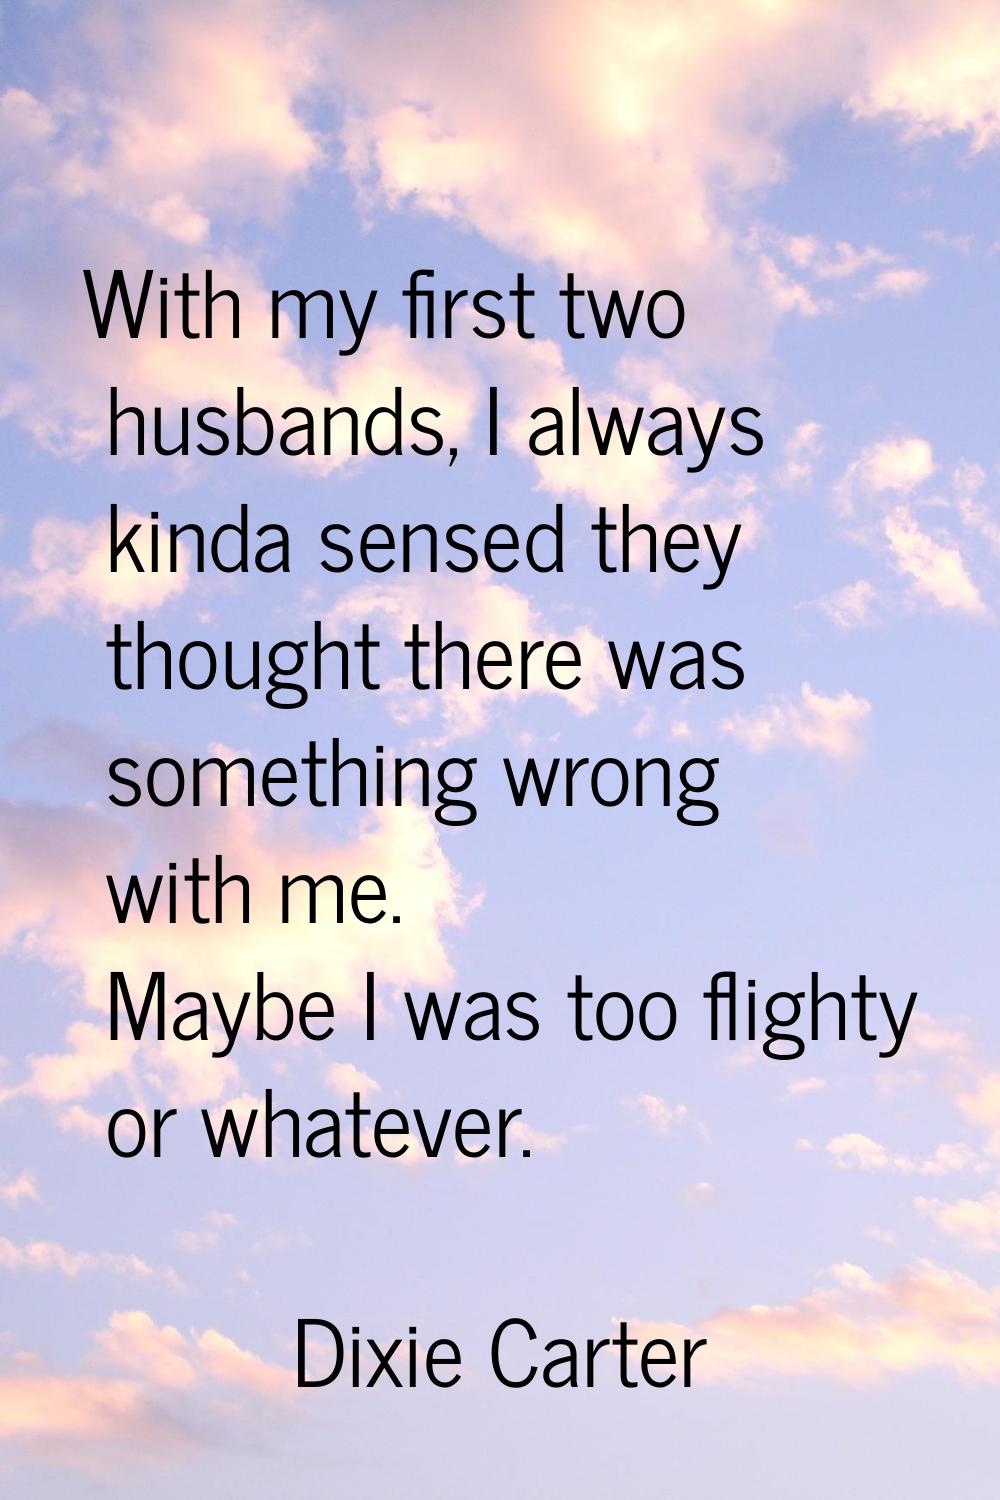 With my first two husbands, I always kinda sensed they thought there was something wrong with me. M